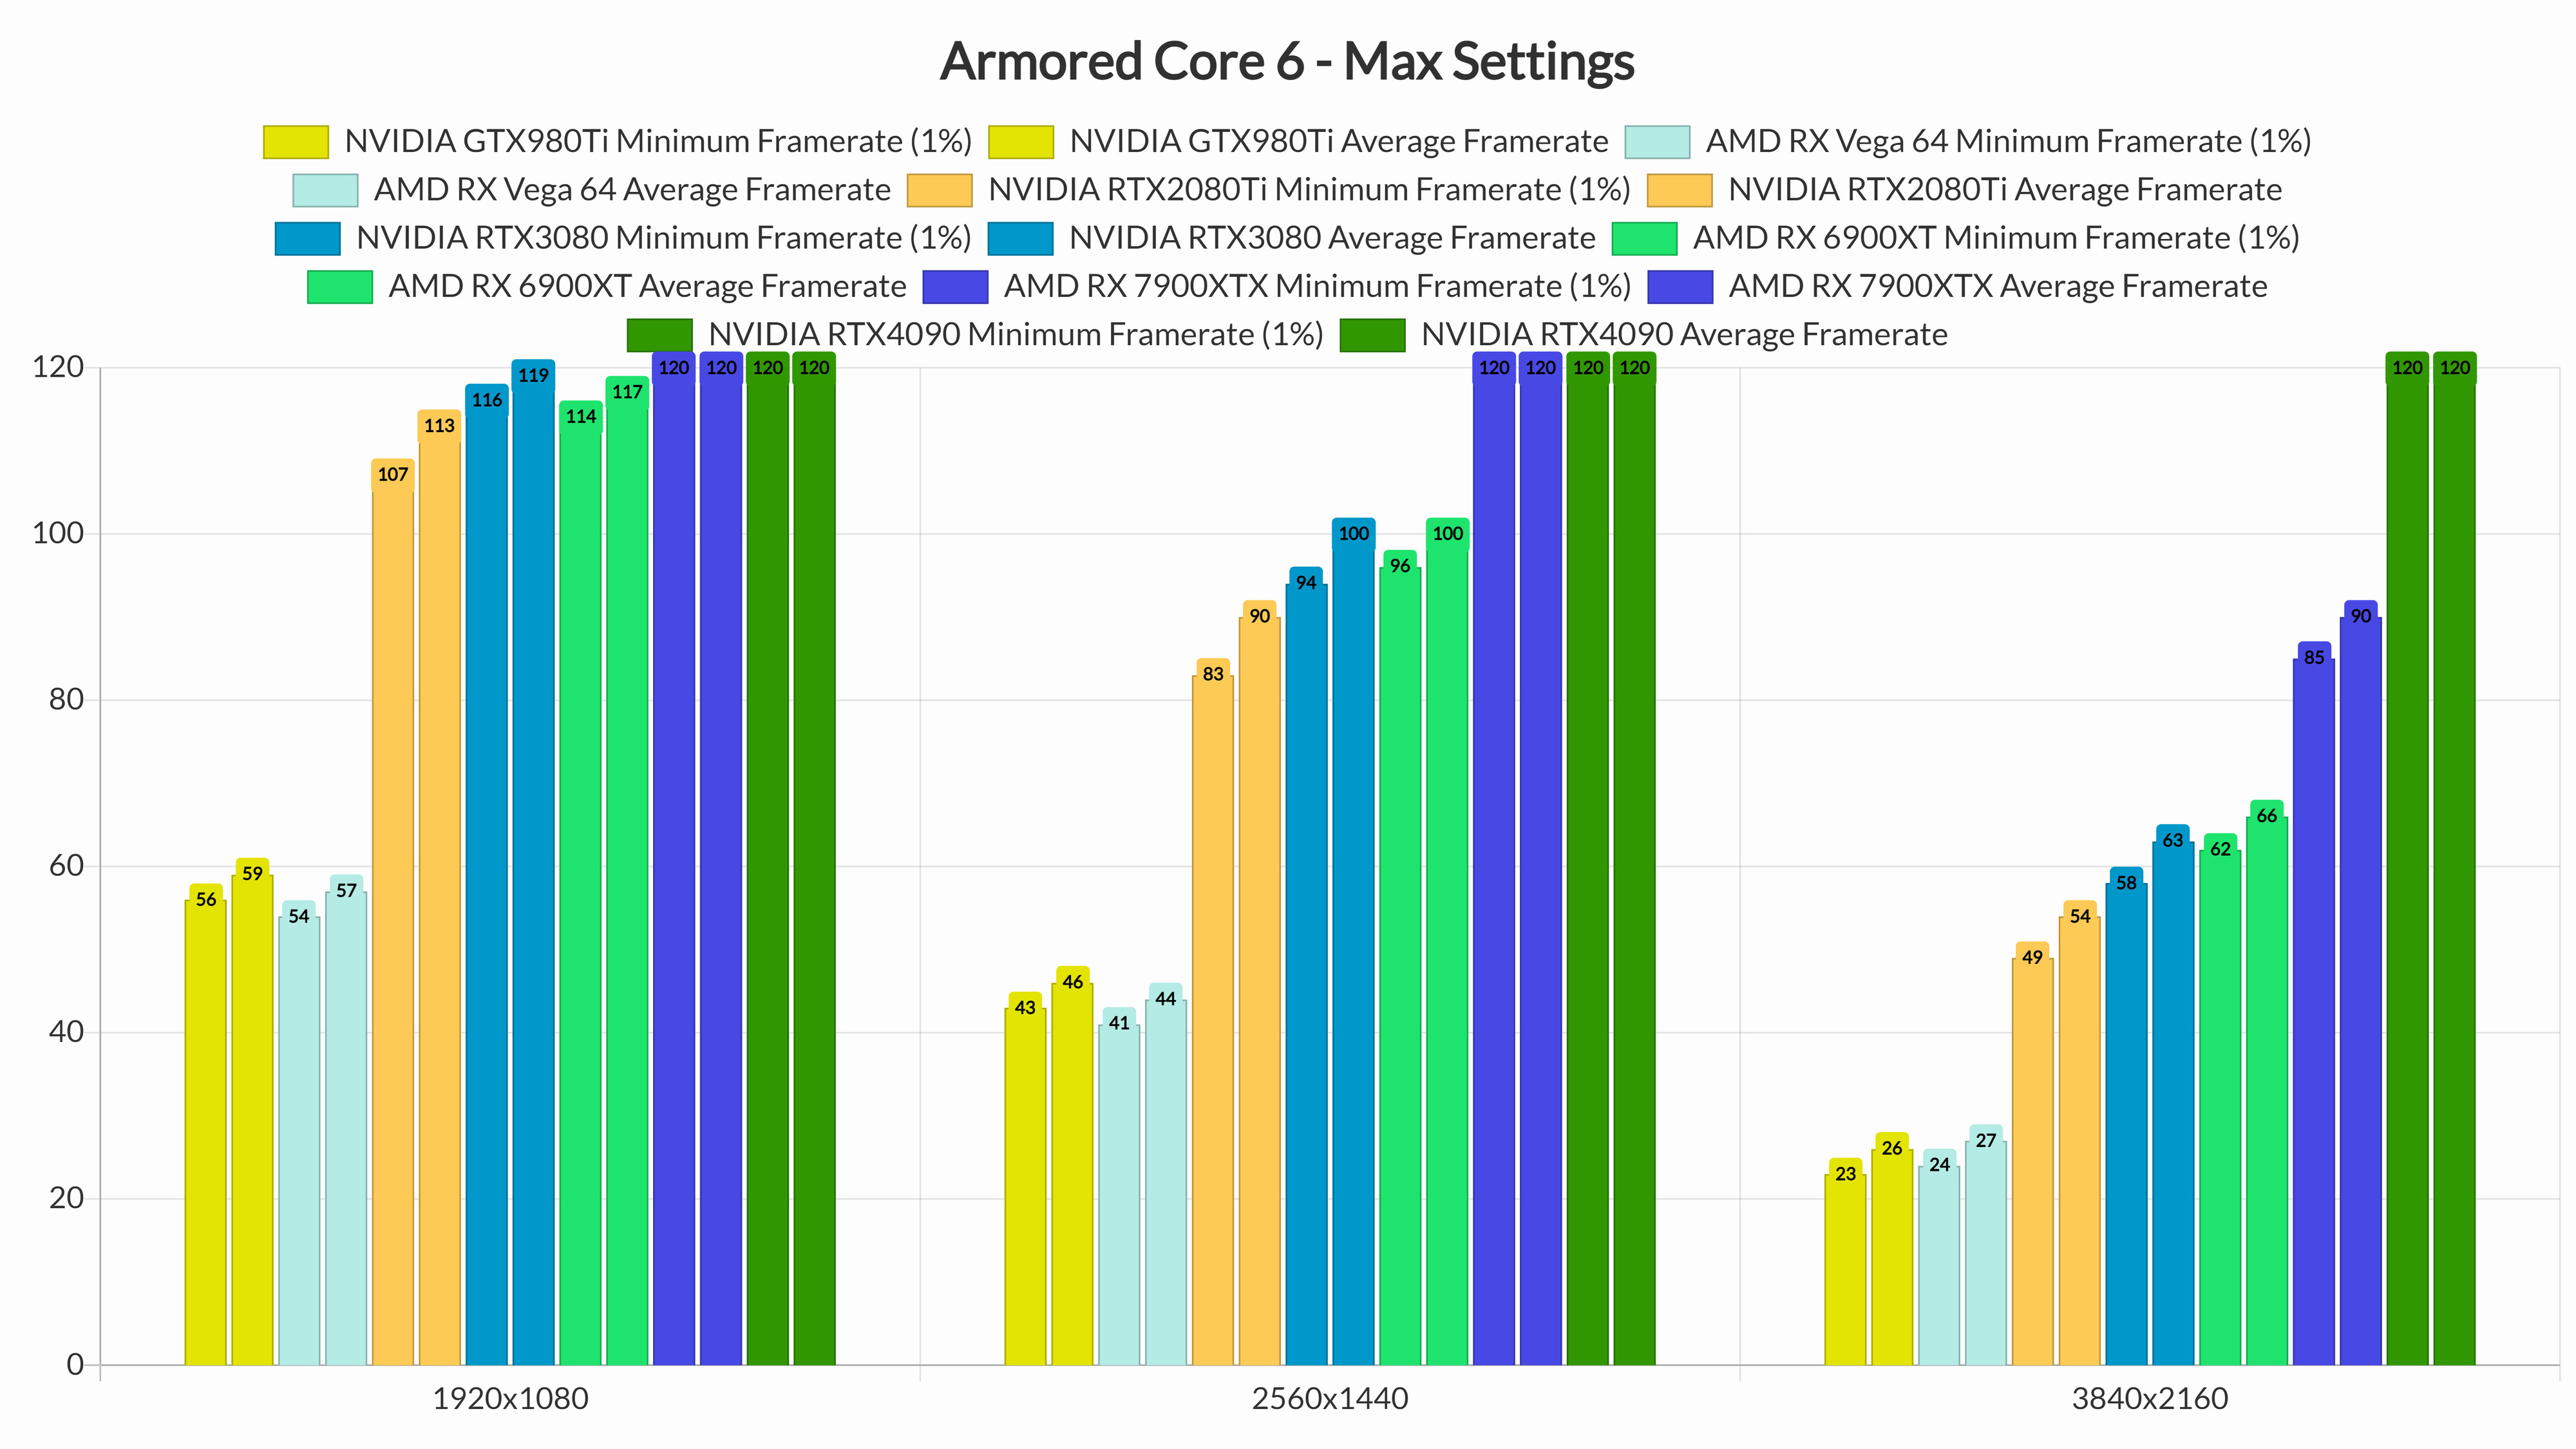 Armored Core 6 Performance Review - PS5 vs Xbox Series X